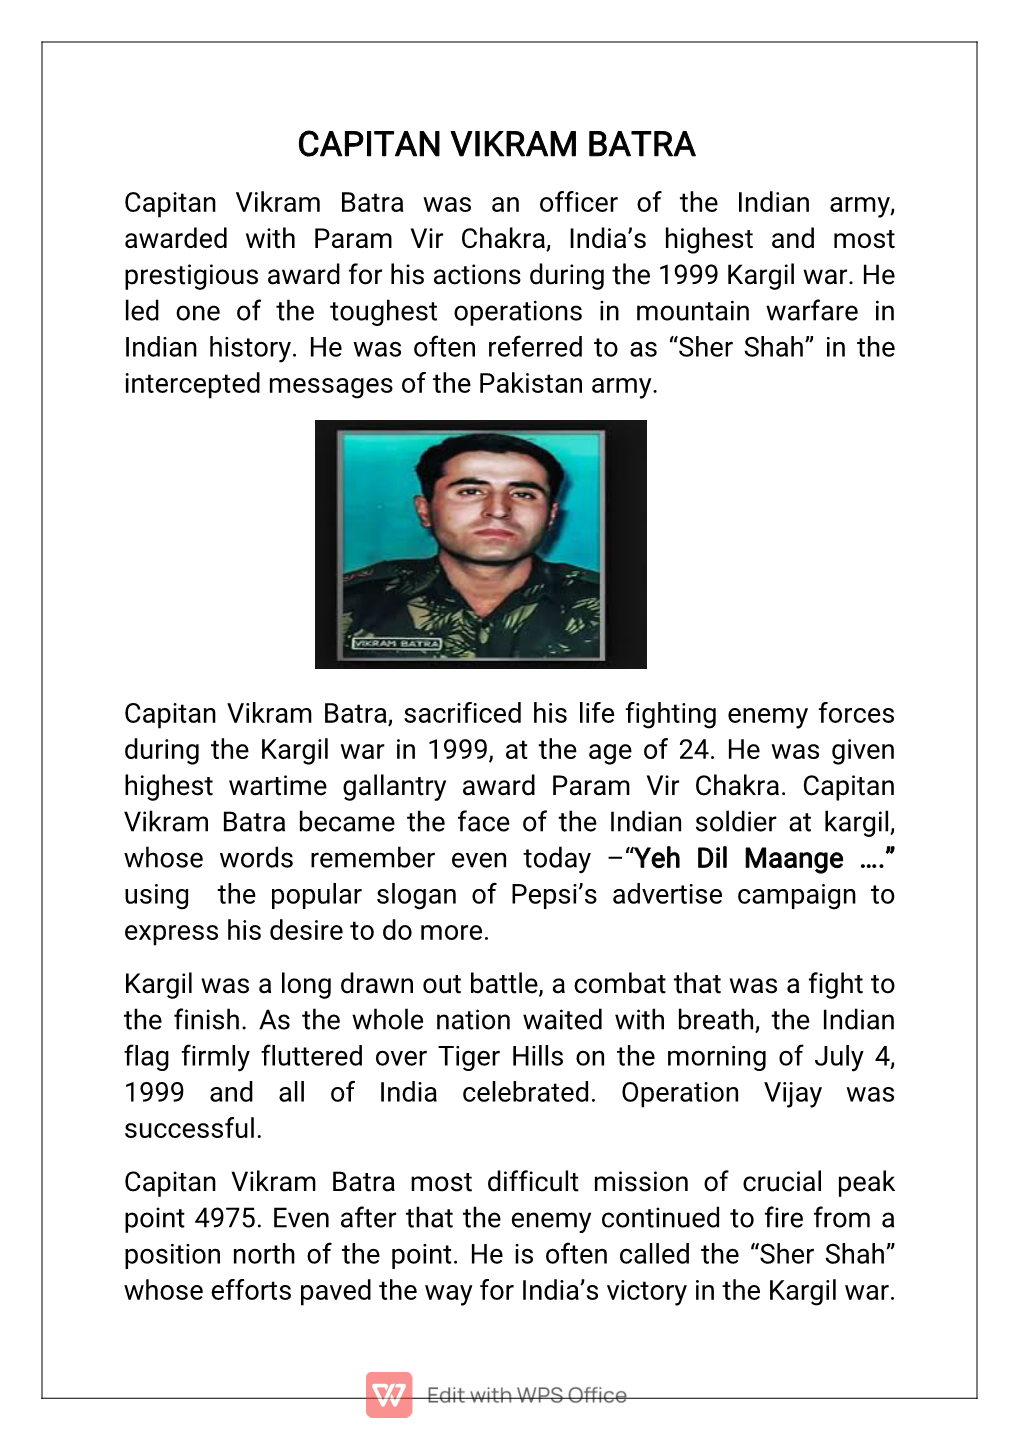 Capitan Vikram Batra Was an Officer of the Indian Army